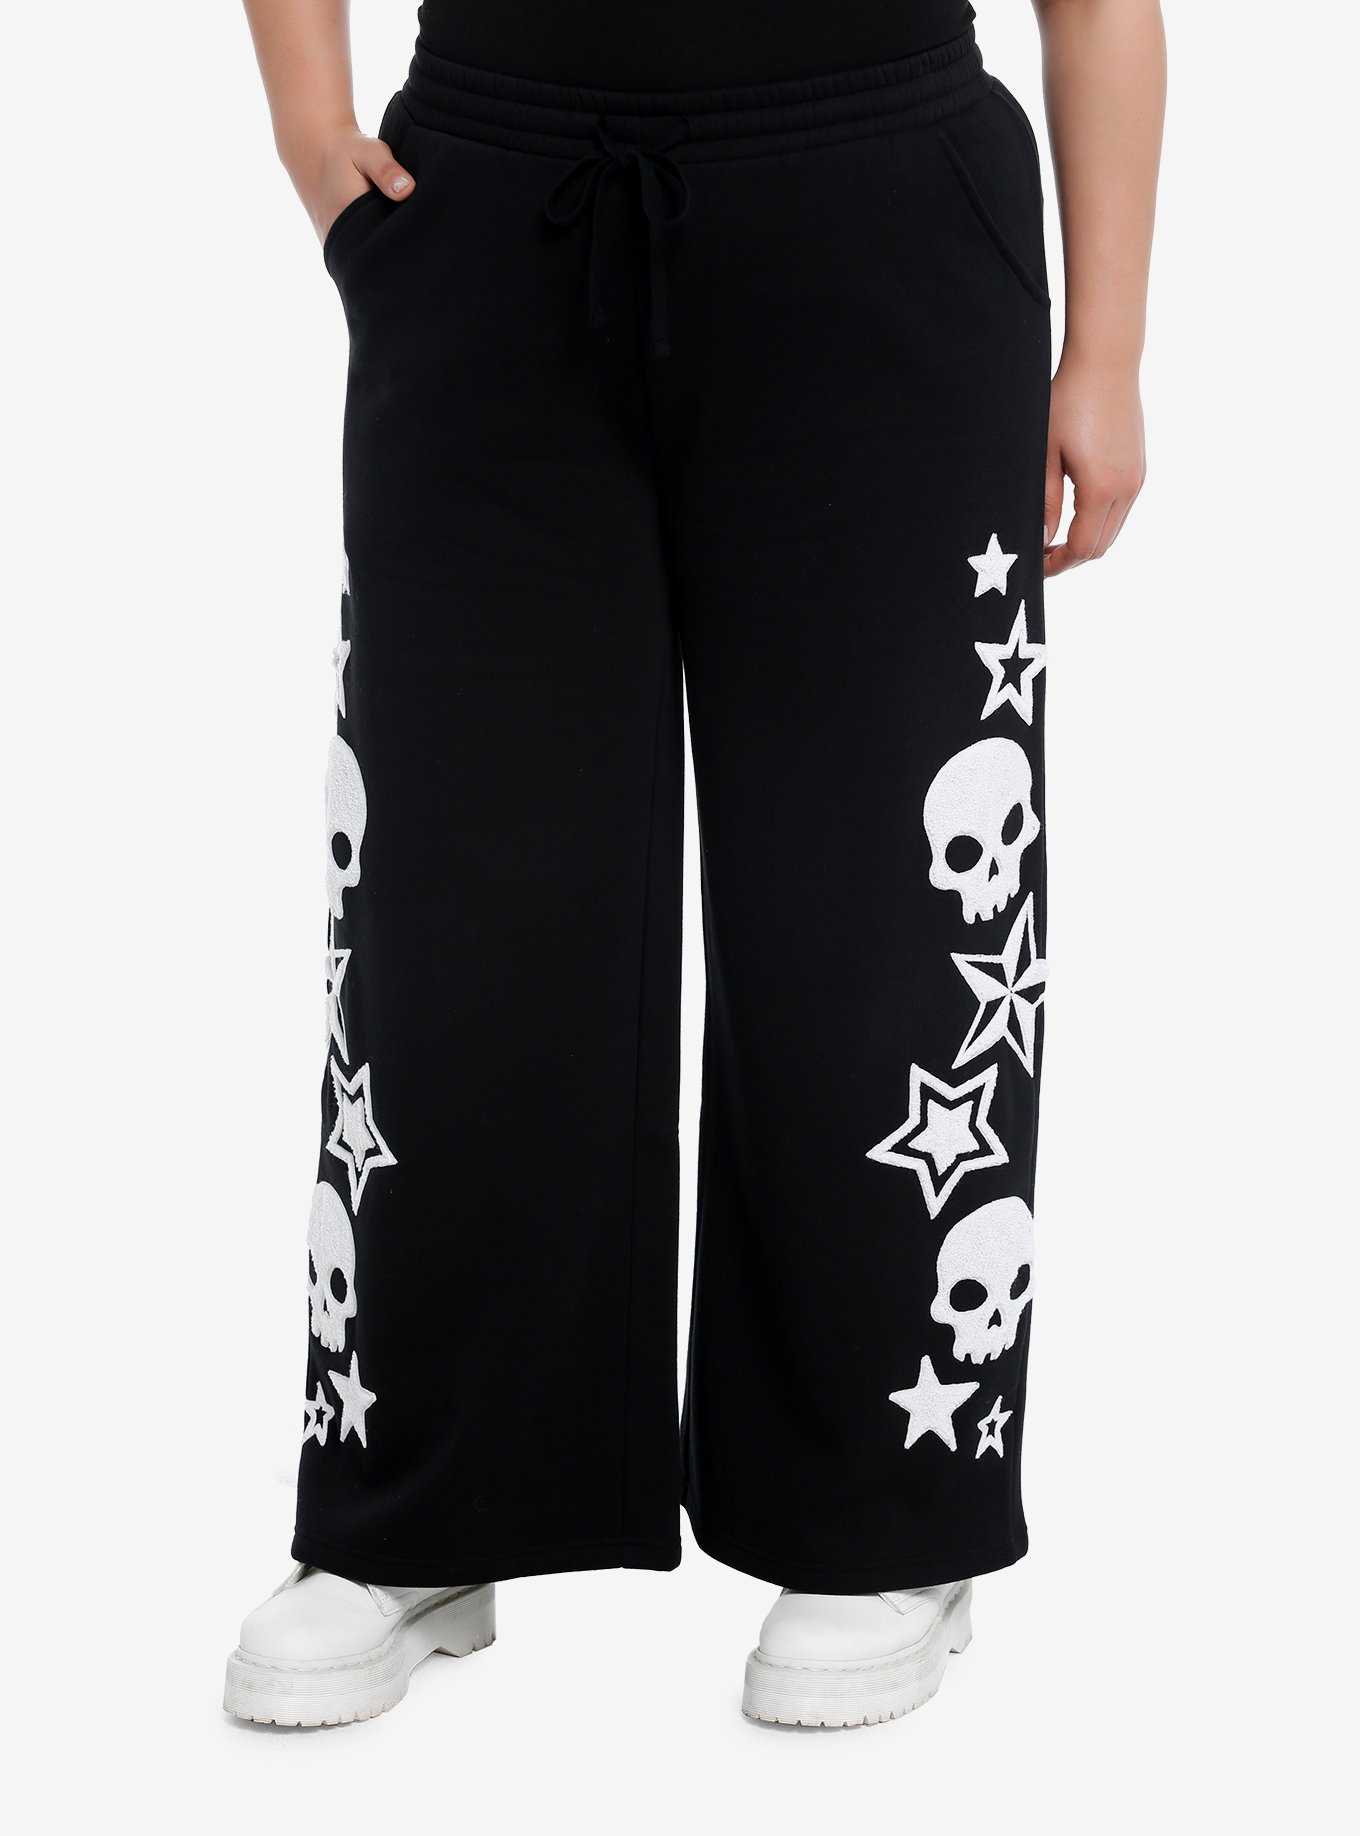 Skull Star Fuzzy Patch Wide Leg Girls Lounge Pants Plus Size, , hi-res